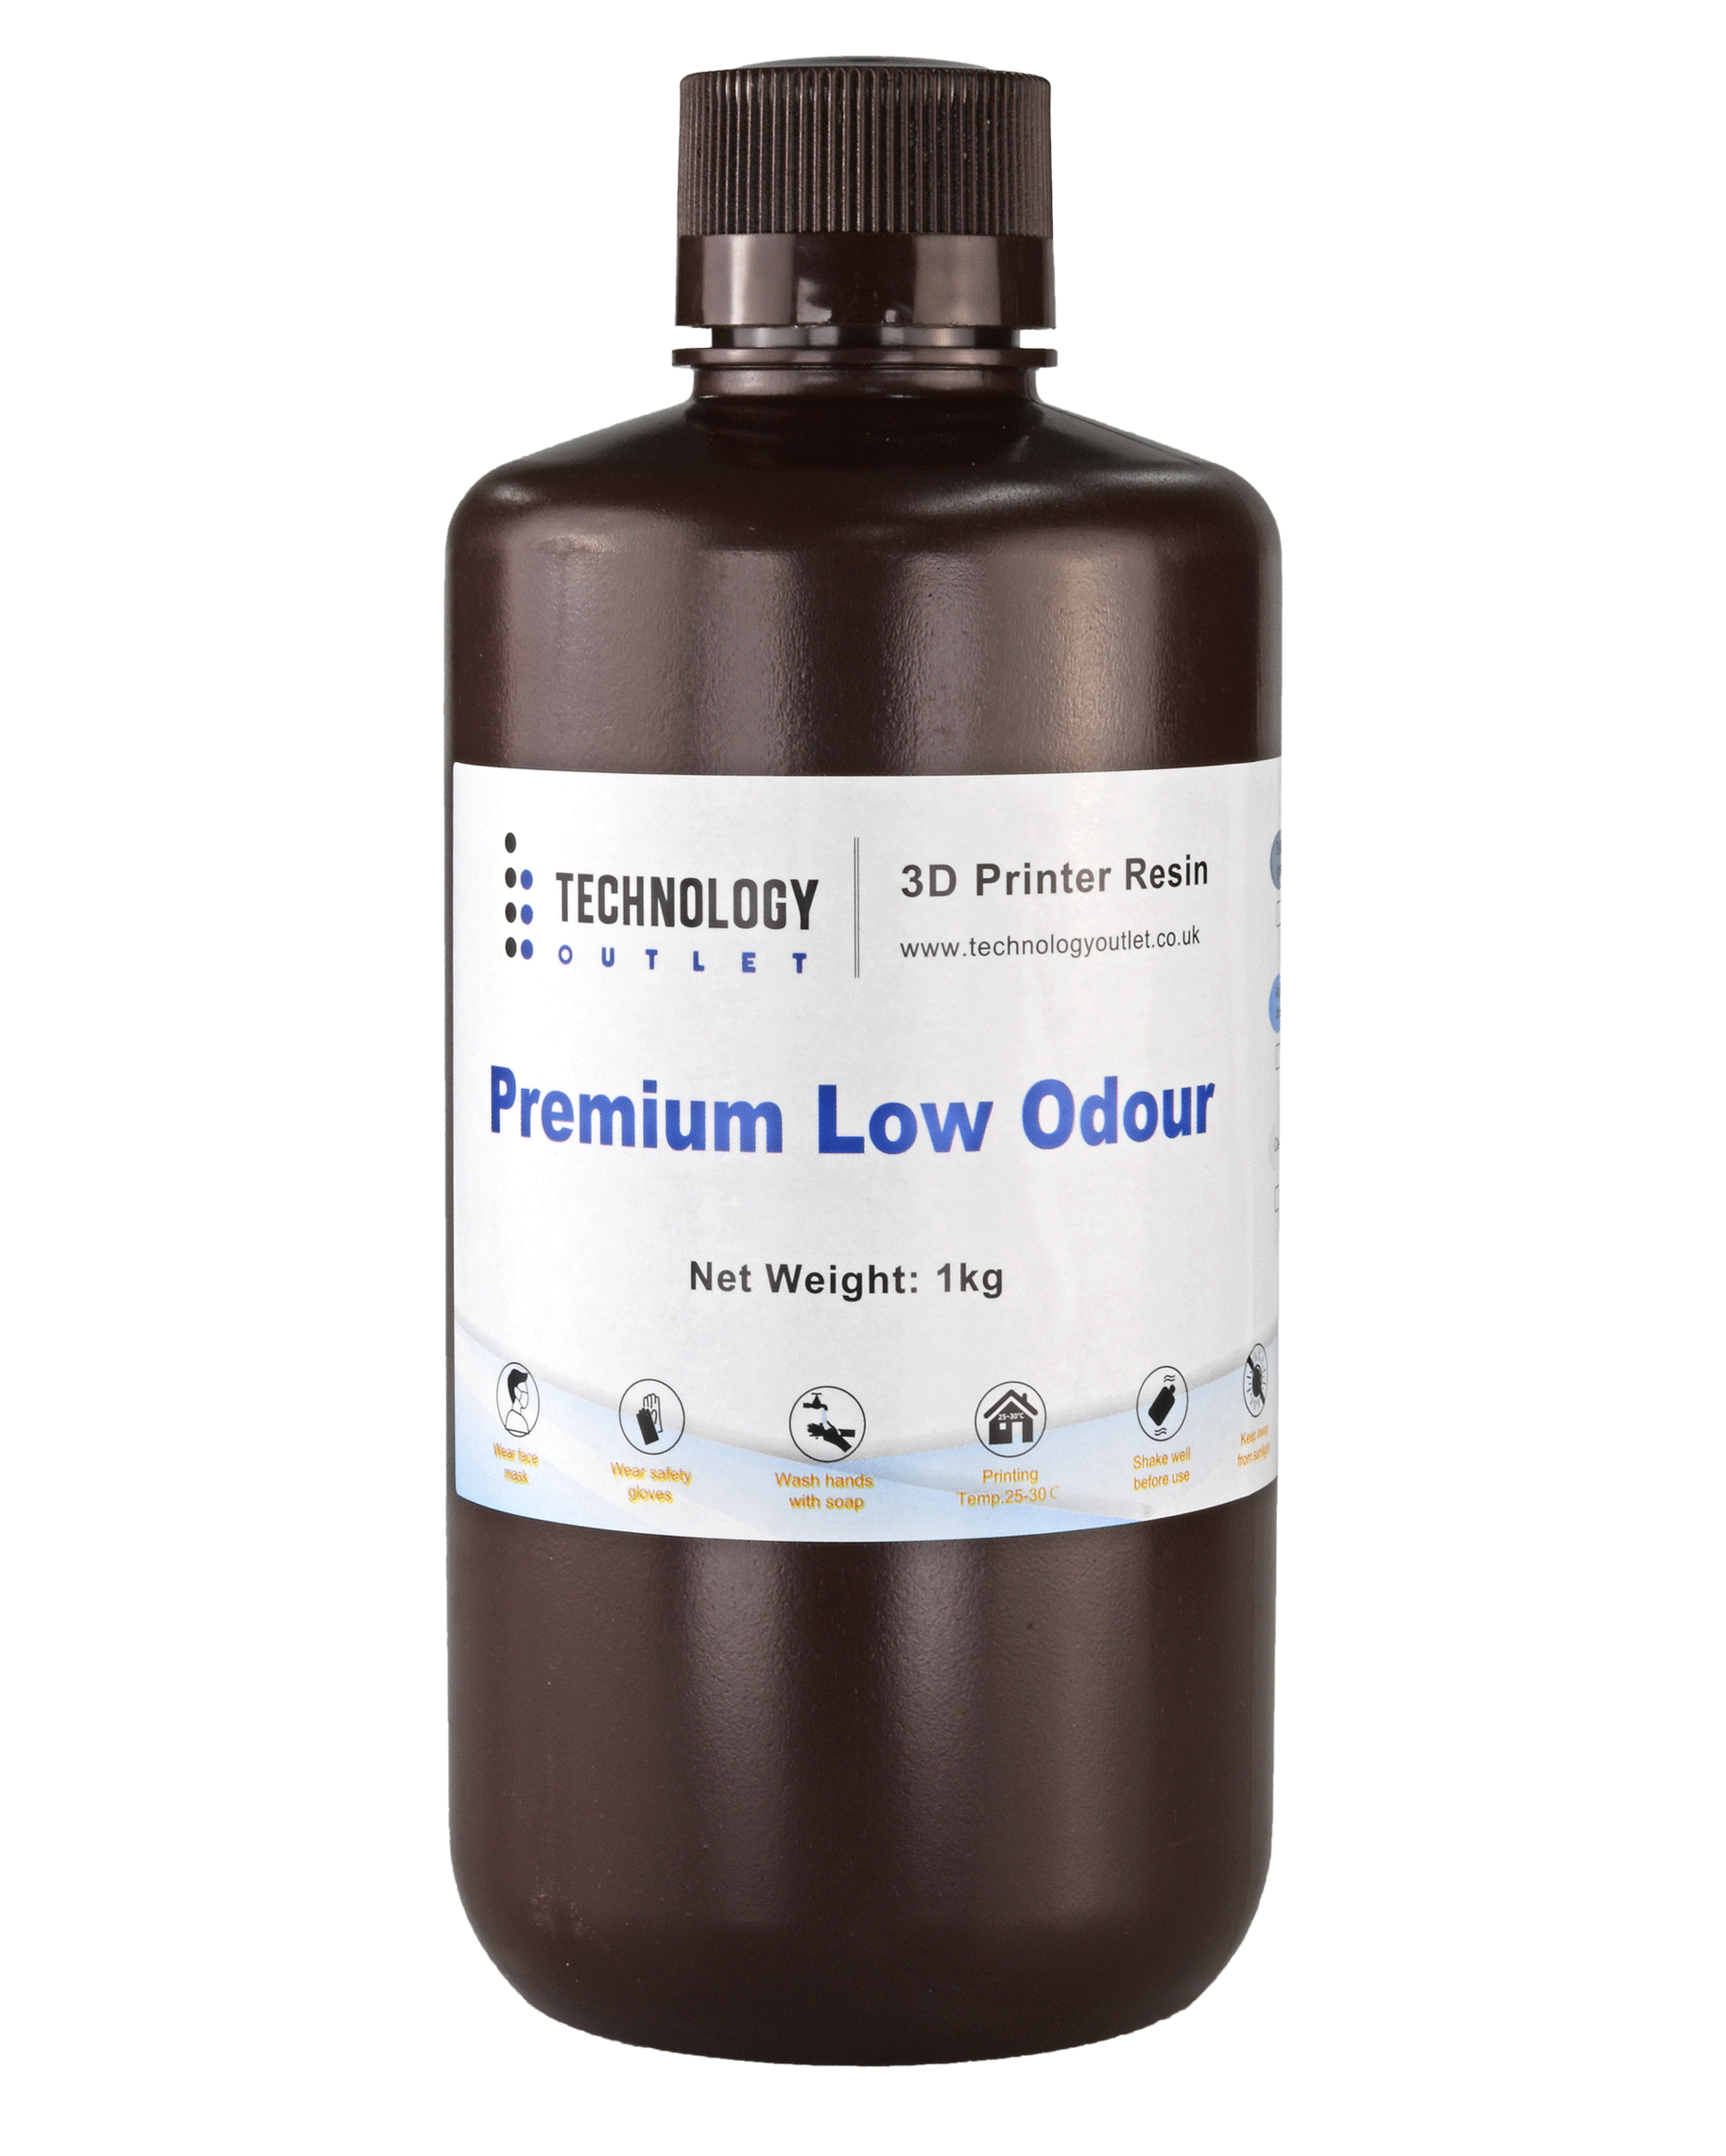 Technology Outlet Premium Low Odour 3D Printer Resin - Technology Outlet